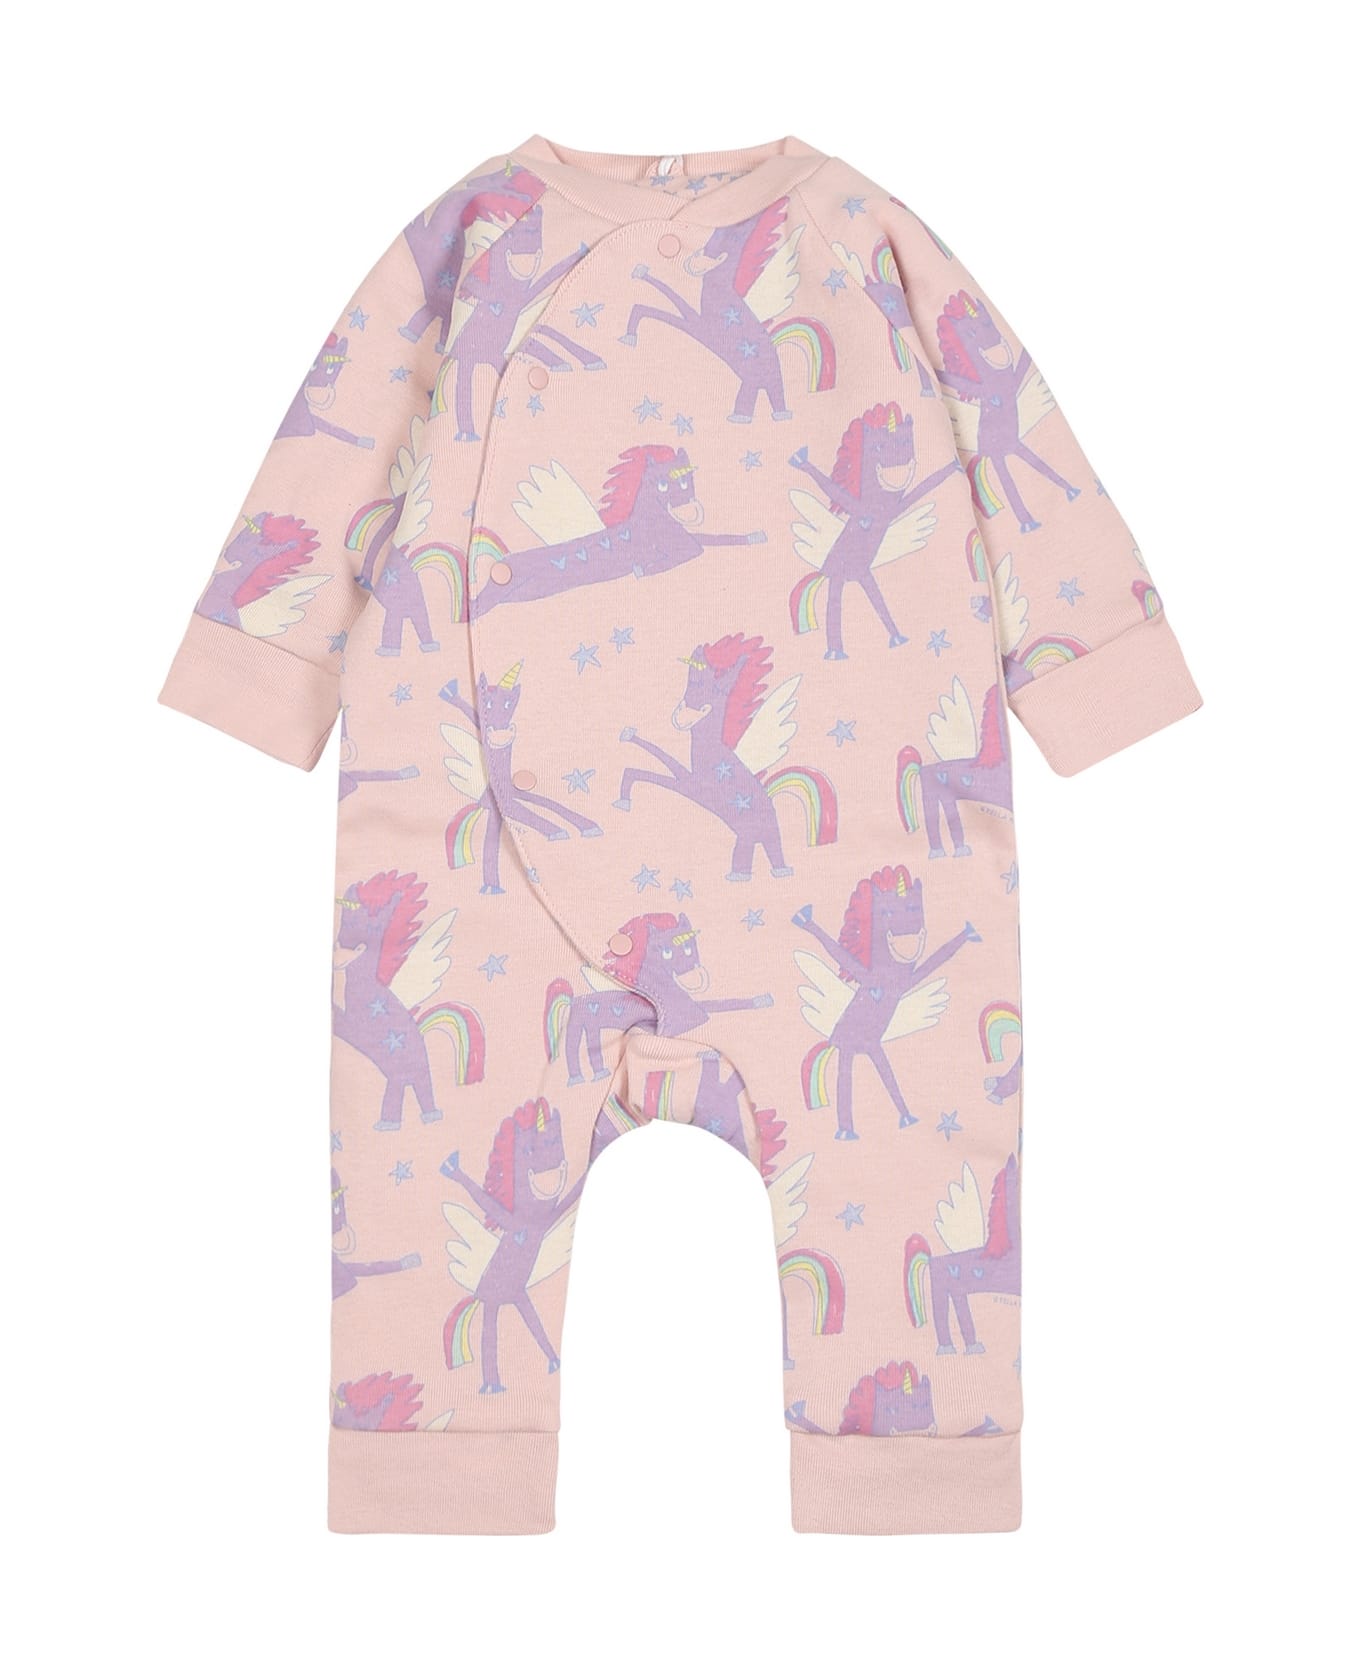 Stella McCartney Kids Pink Babygrow For Baby Girl With Unicors - Pink